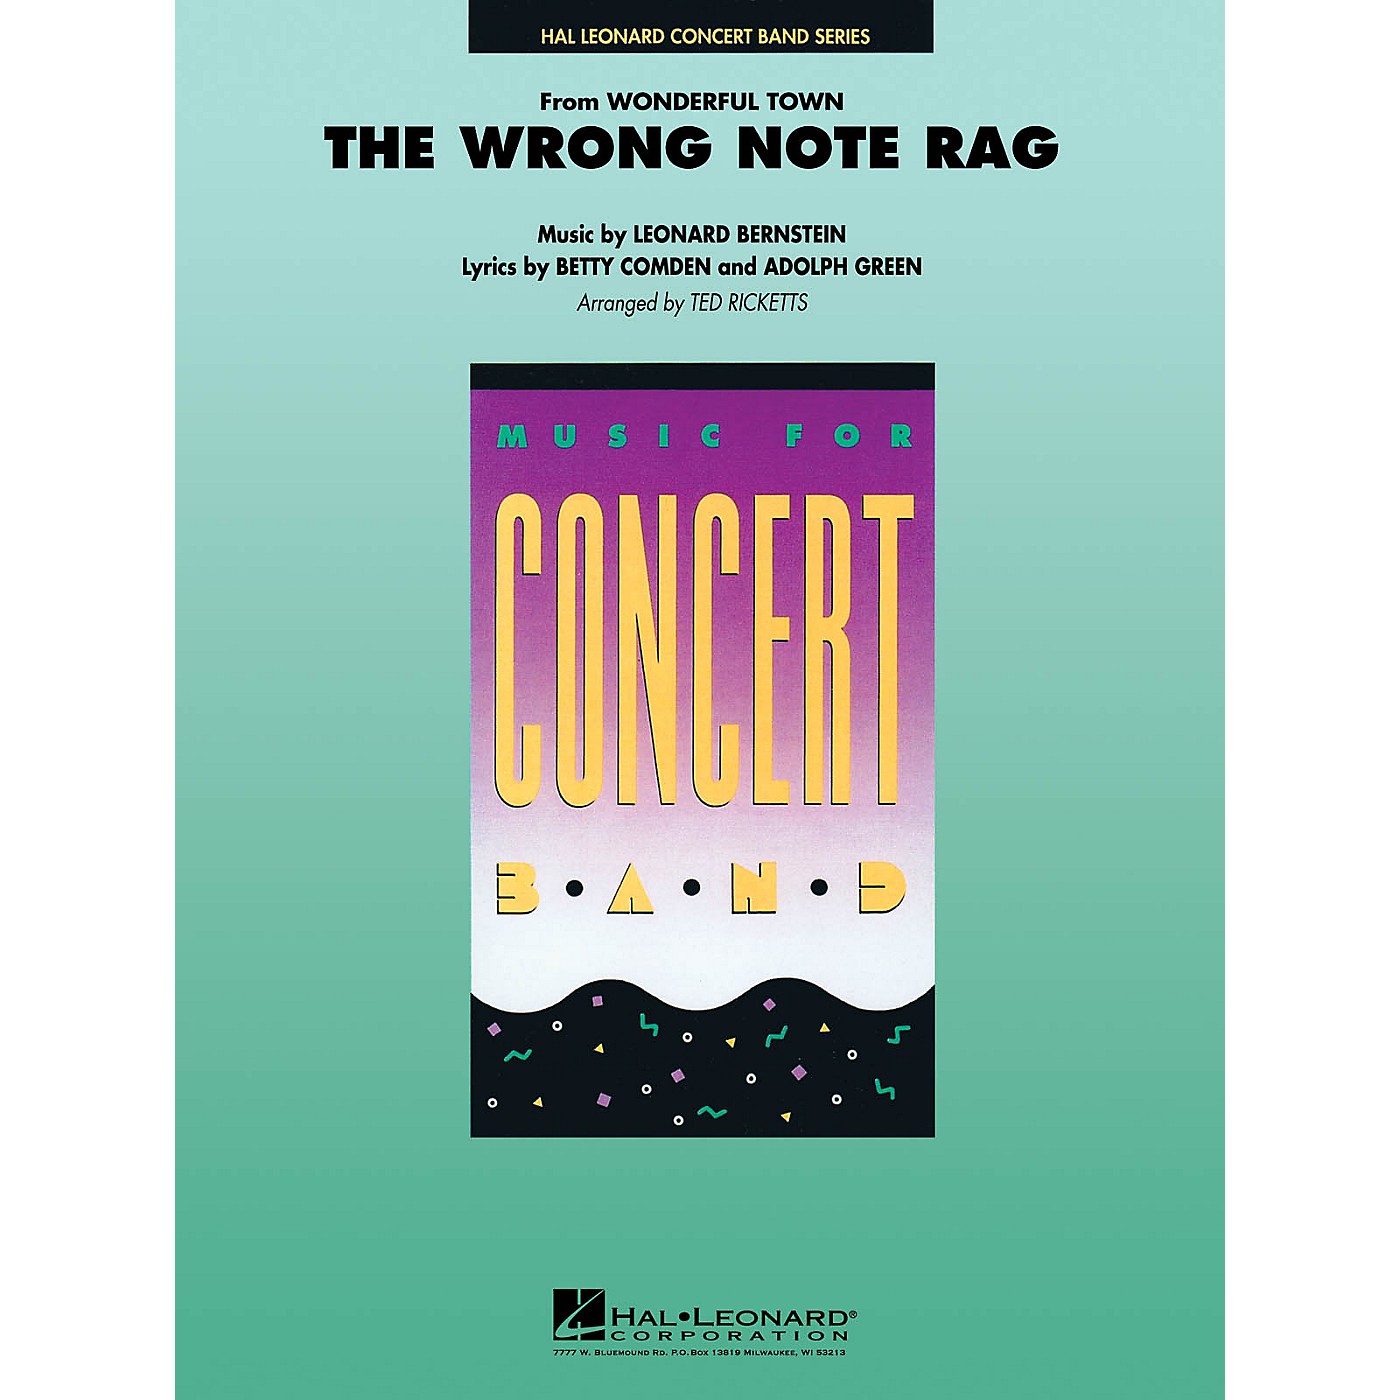 Hal Leonard The Wrong Note Rag (from Wonderful Town) Concert Band Level 4-5 Arranged by Ted Ricketts thumbnail